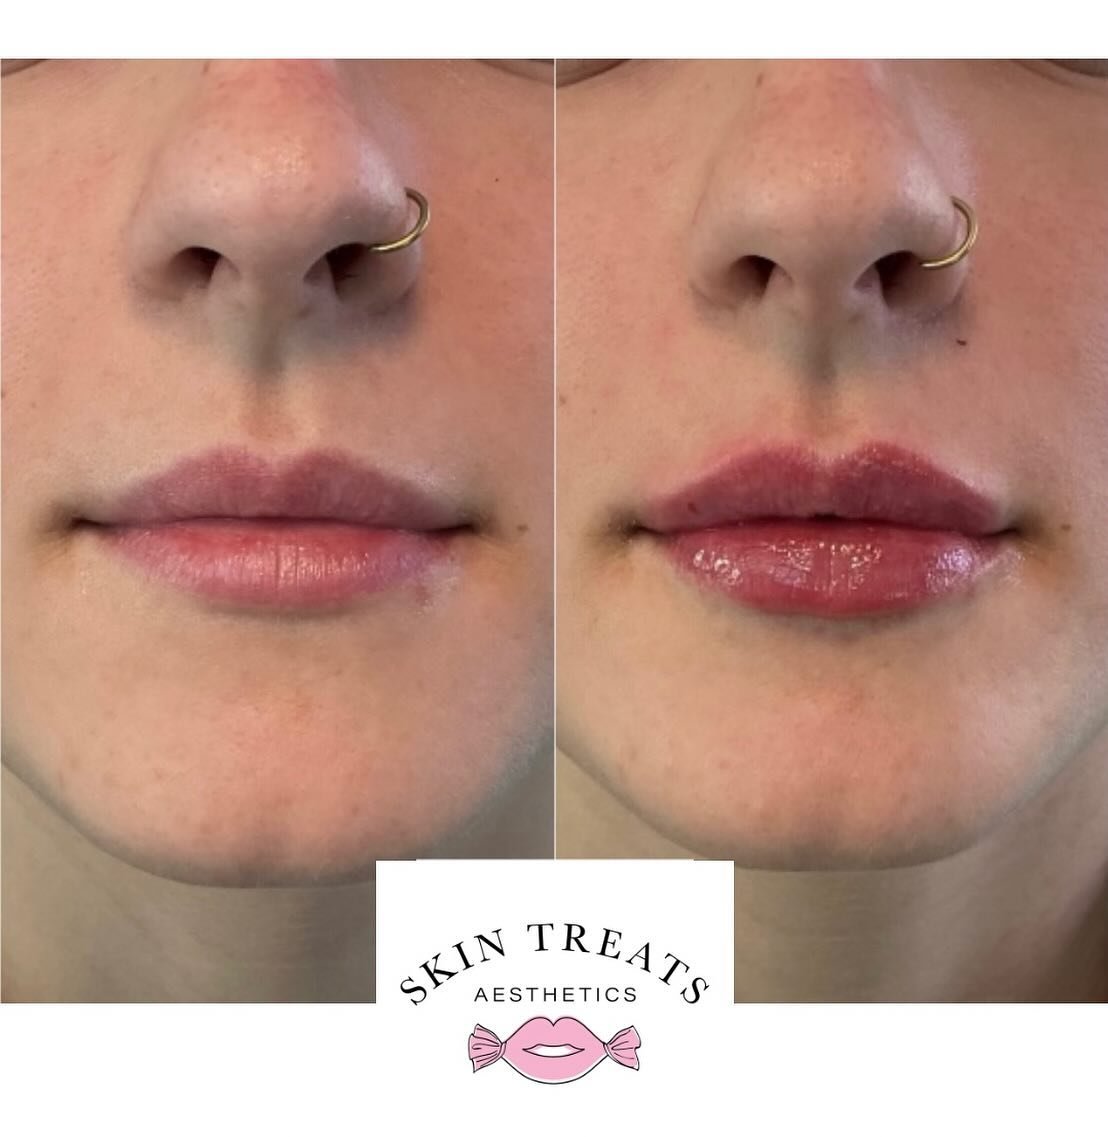 Considering treating yourself to lip filler? 

Here&rsquo;s what an appointment will look like. ✨

Consultation: We&rsquo;ll chat about your lip goals and desires. I&rsquo;ll craft a personalized plan just for you, ensuring we achieve the perfect loo